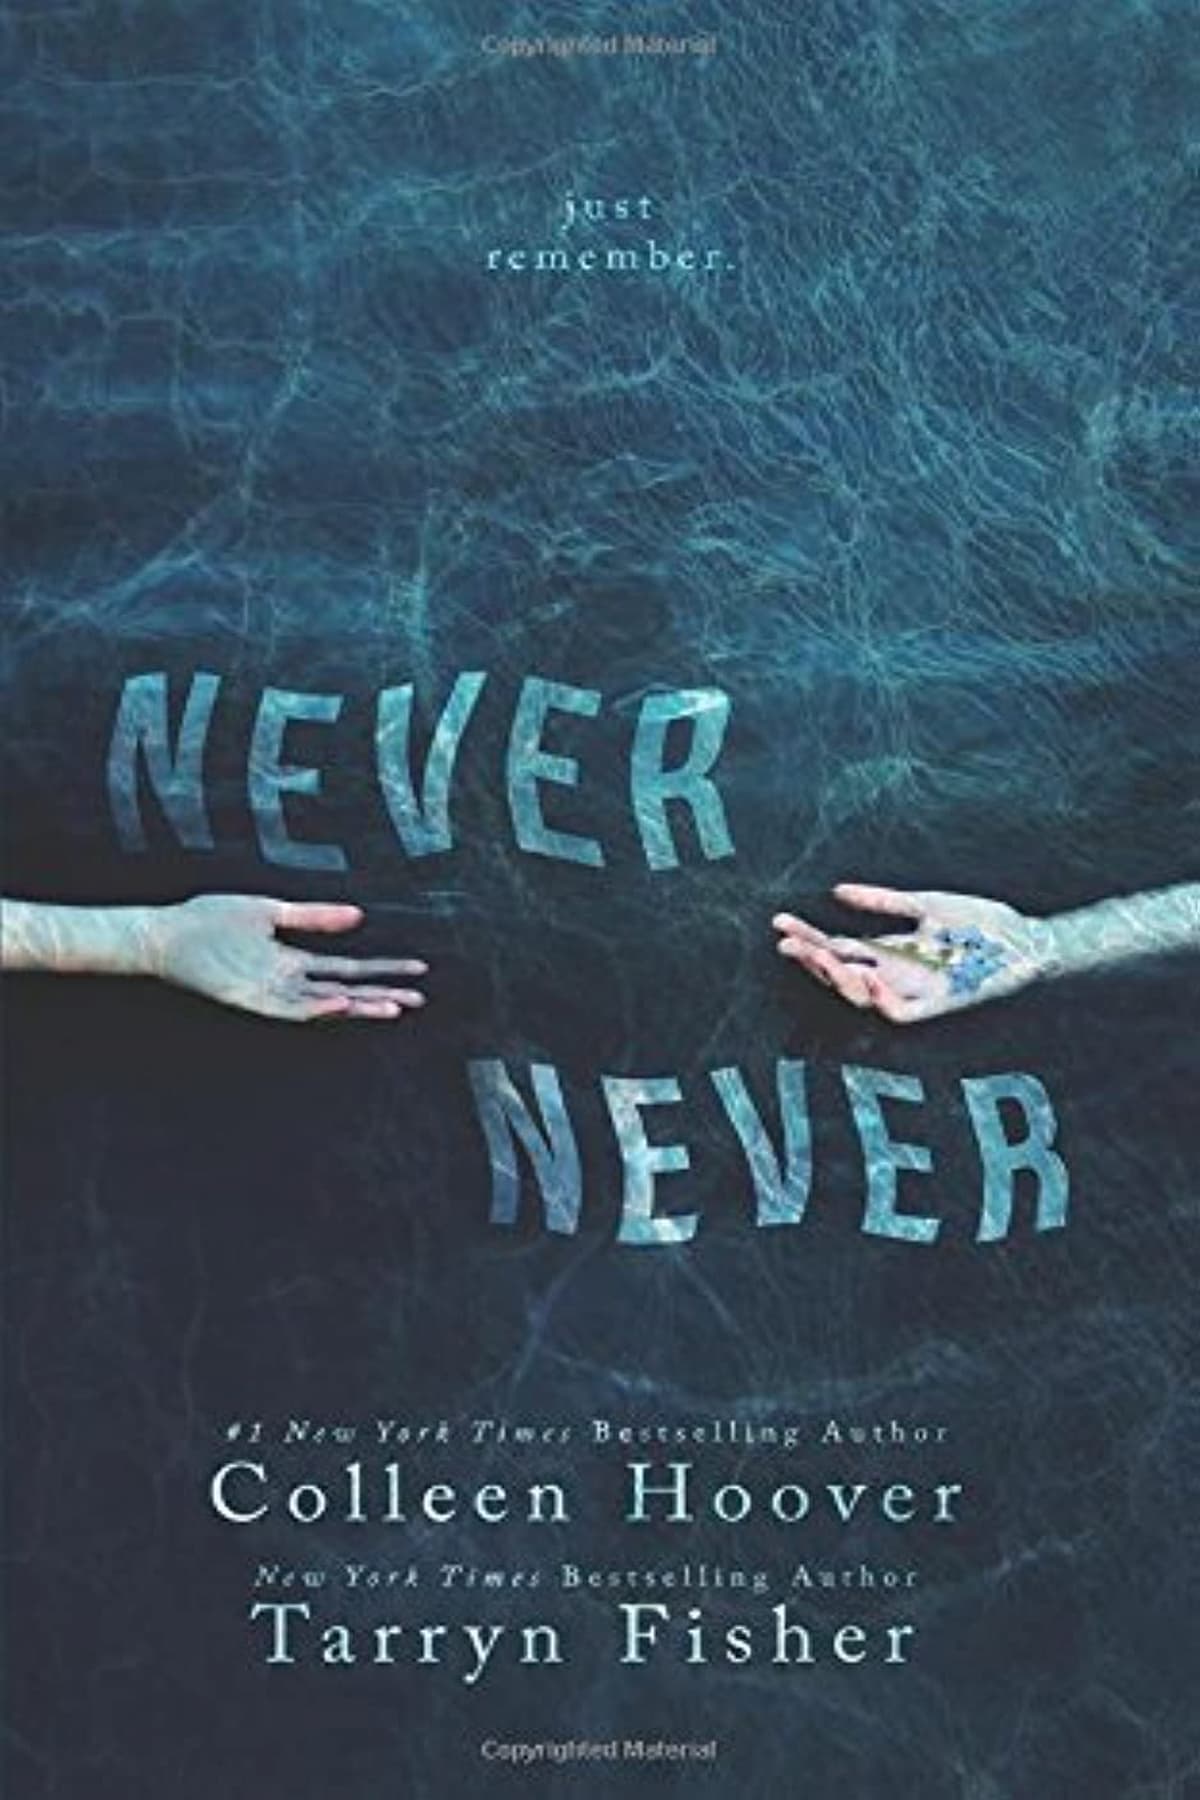 Never Never series—Colleen Hoover: If you've read Colleen Hoover's novels, you're probably familiar with her Never Never series, which is available in hardcover, Kindle, paperbacks, and free audiobooks.